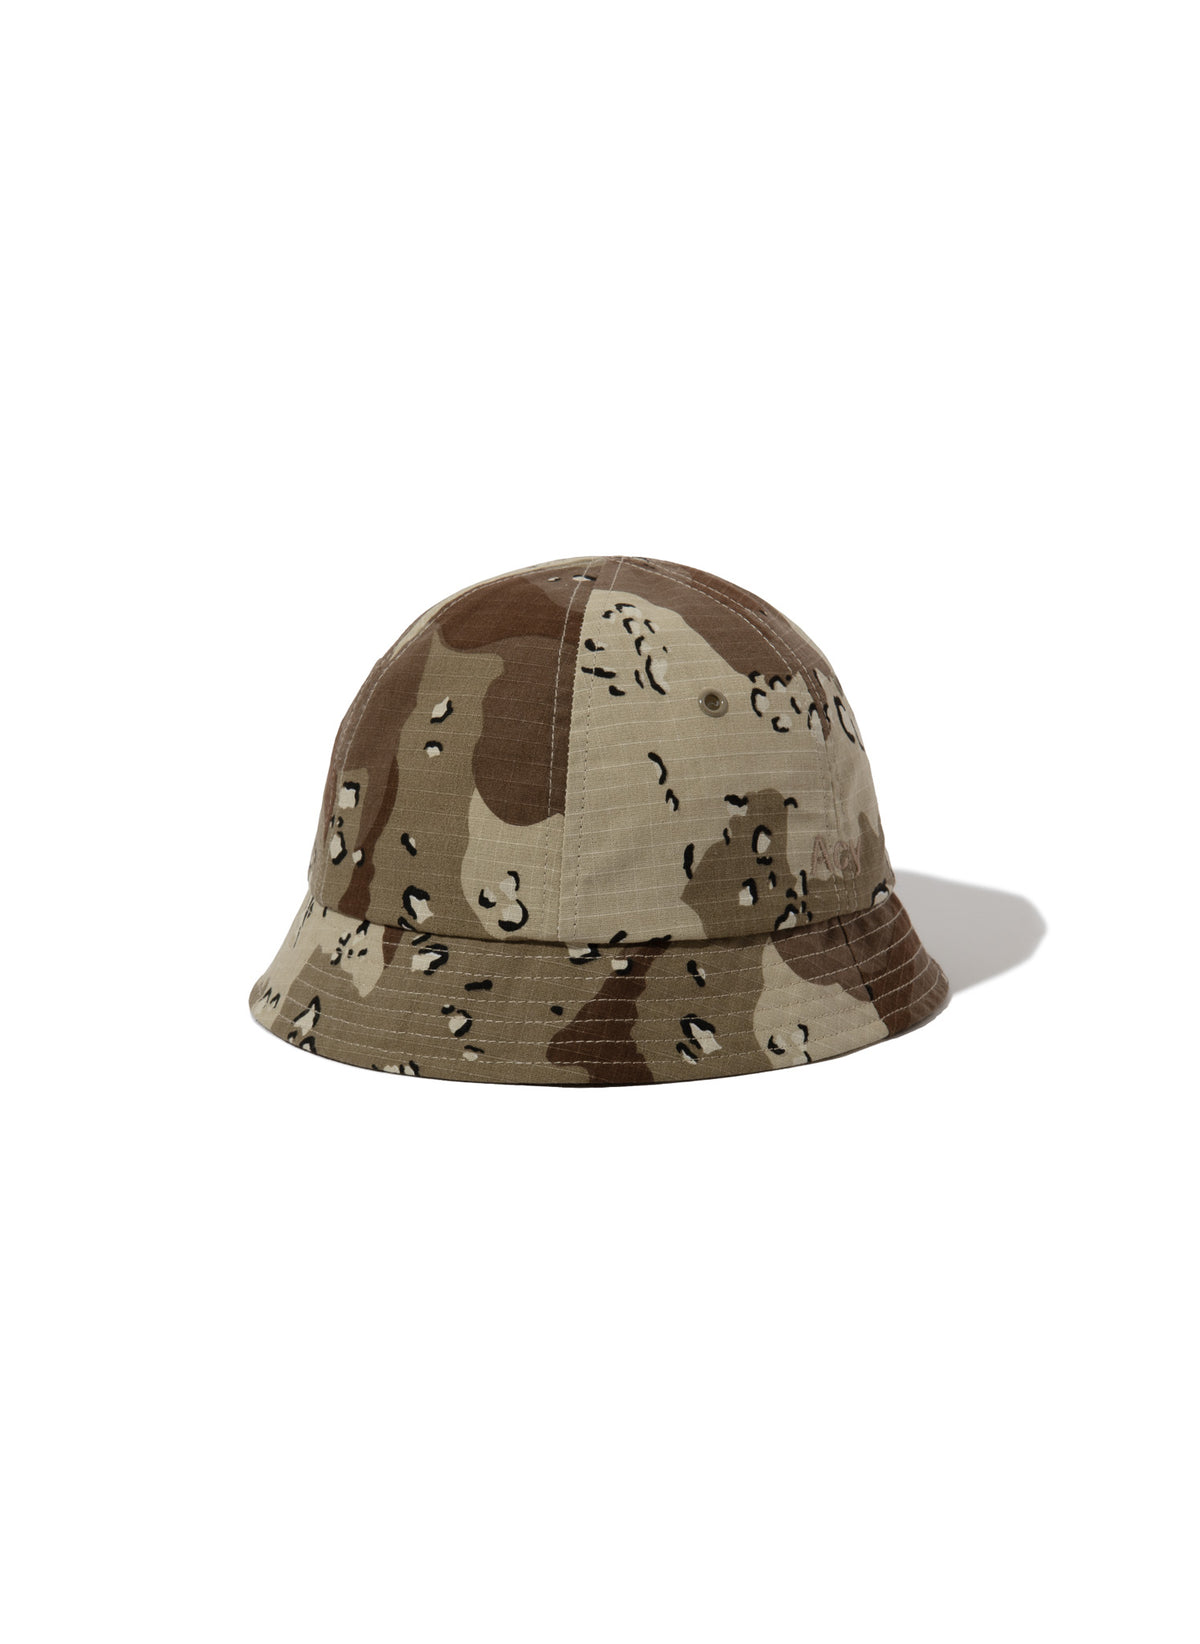 <span style="color: #f50b0b;">Last One</span> Acy / RS6PANEL HAT DESERT